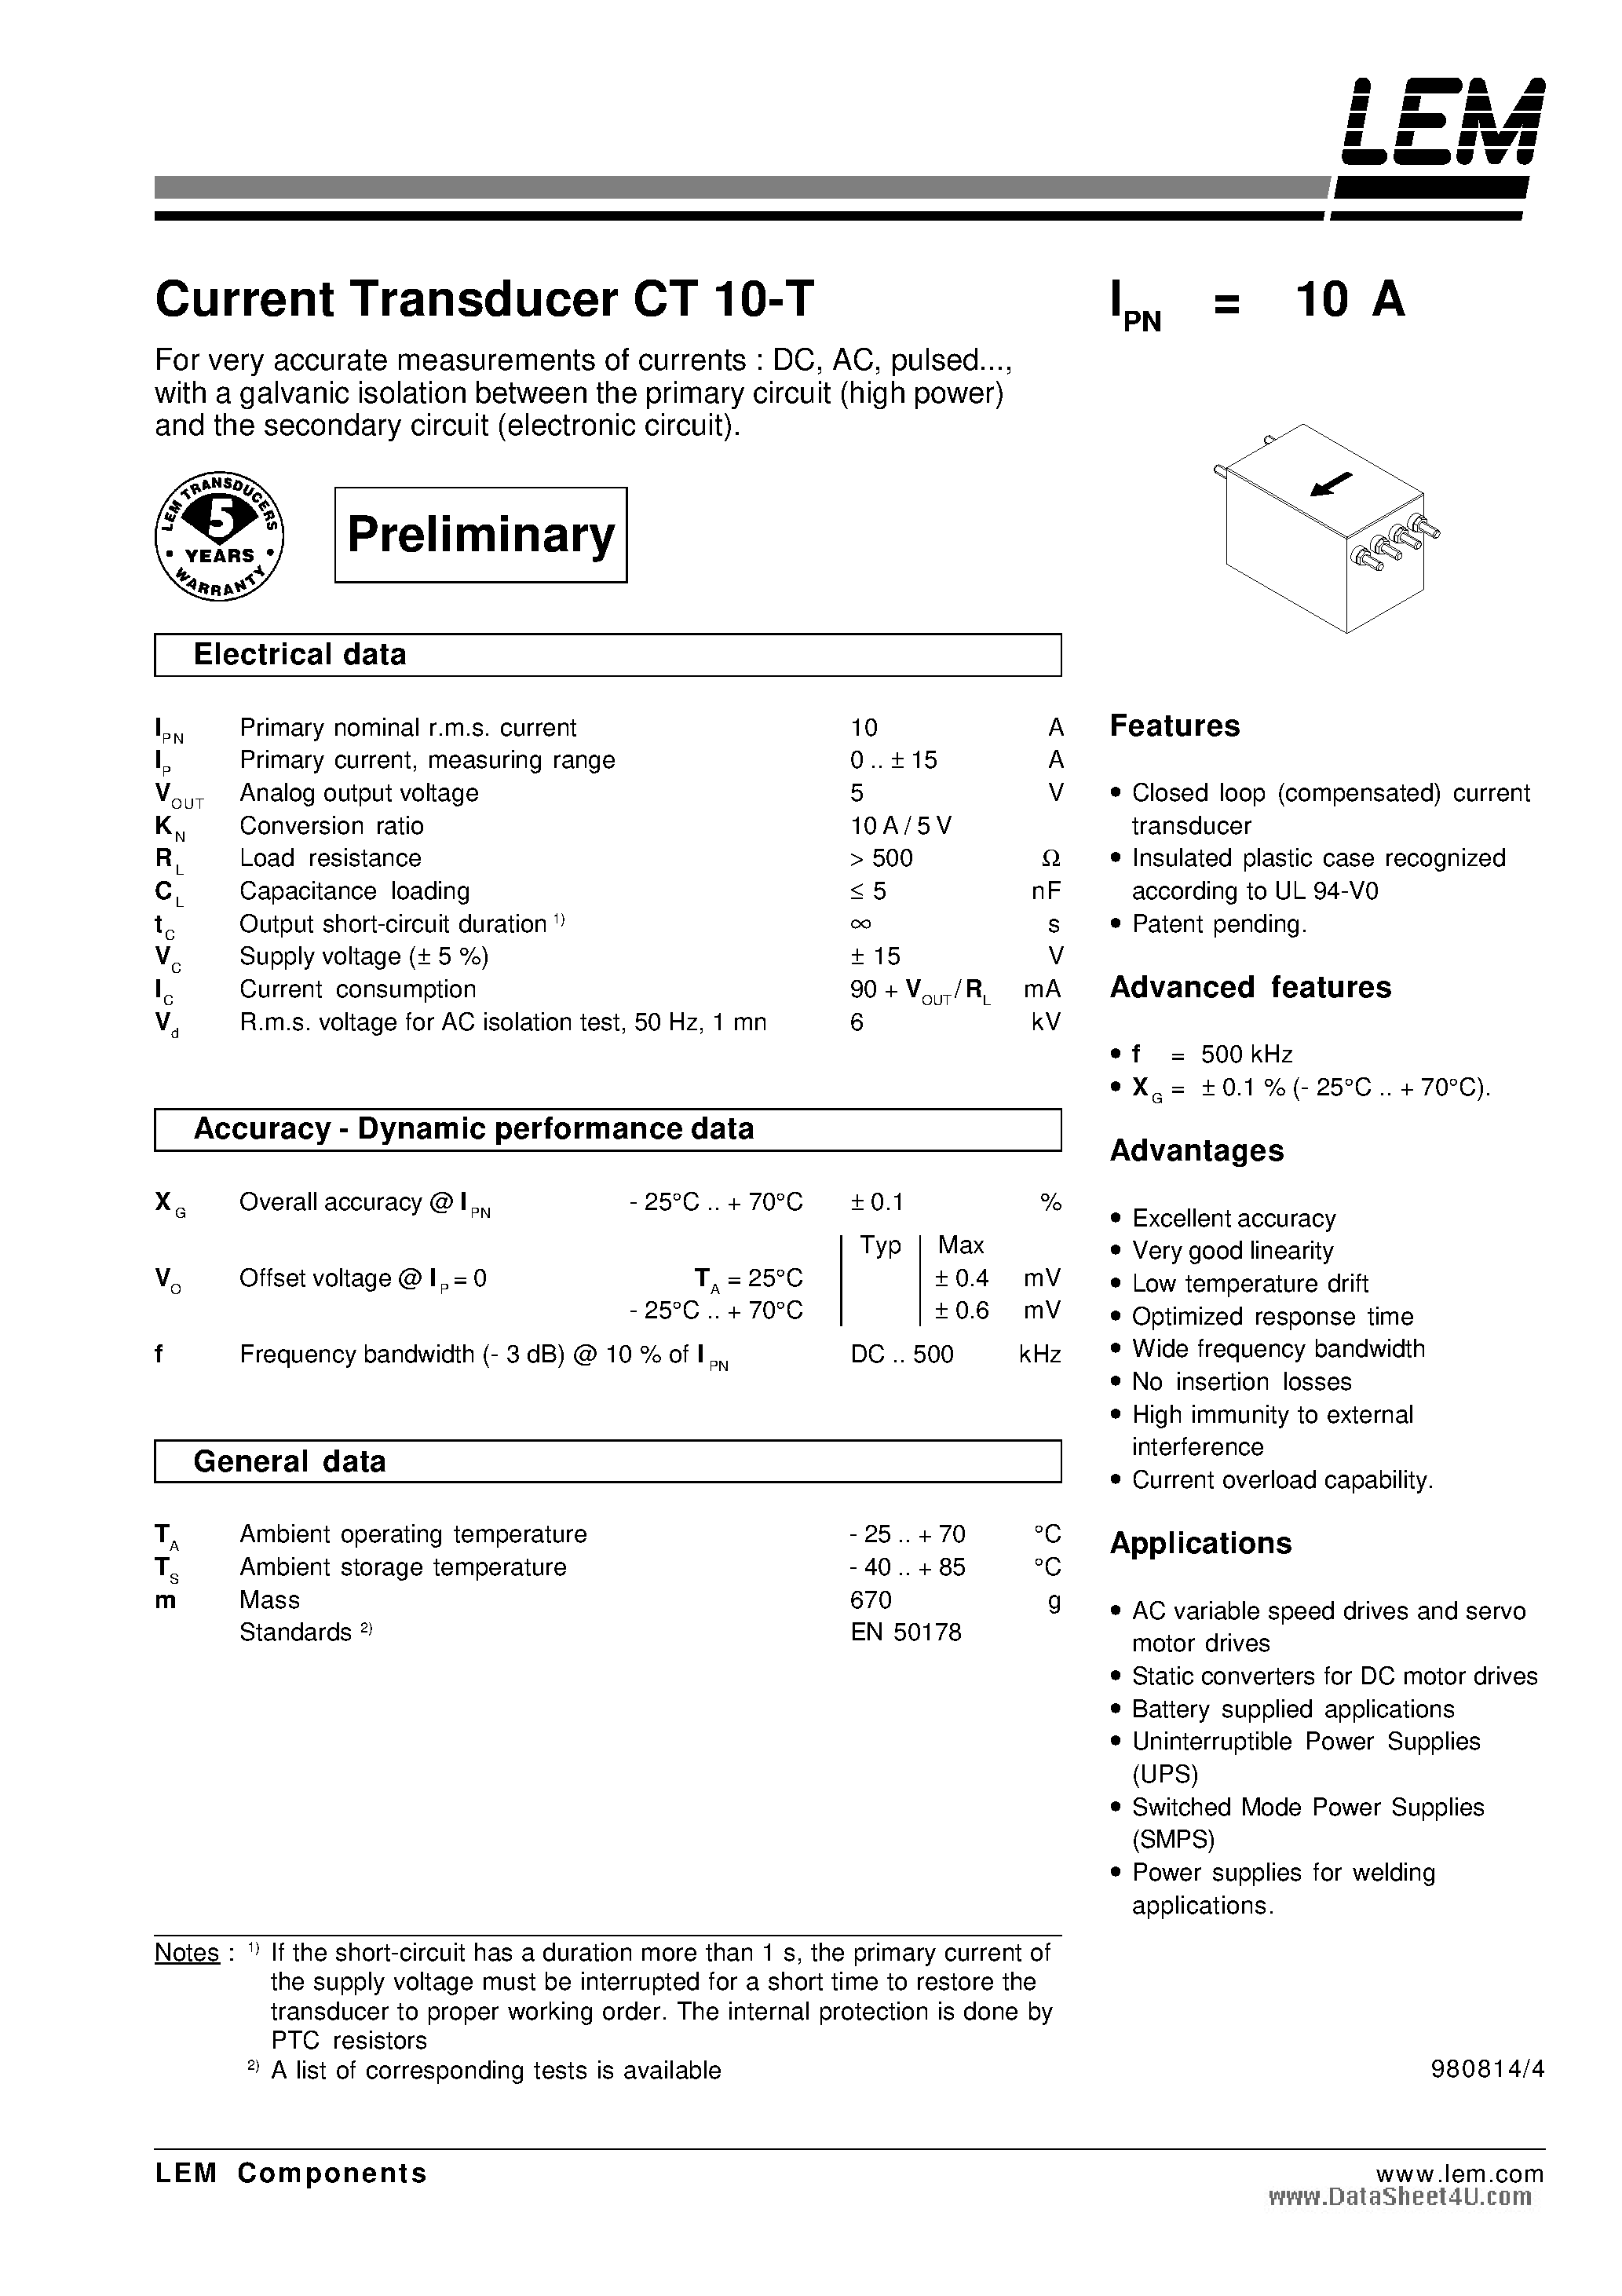 Datasheet CT10-T - Current Transducers CT 10-T page 1